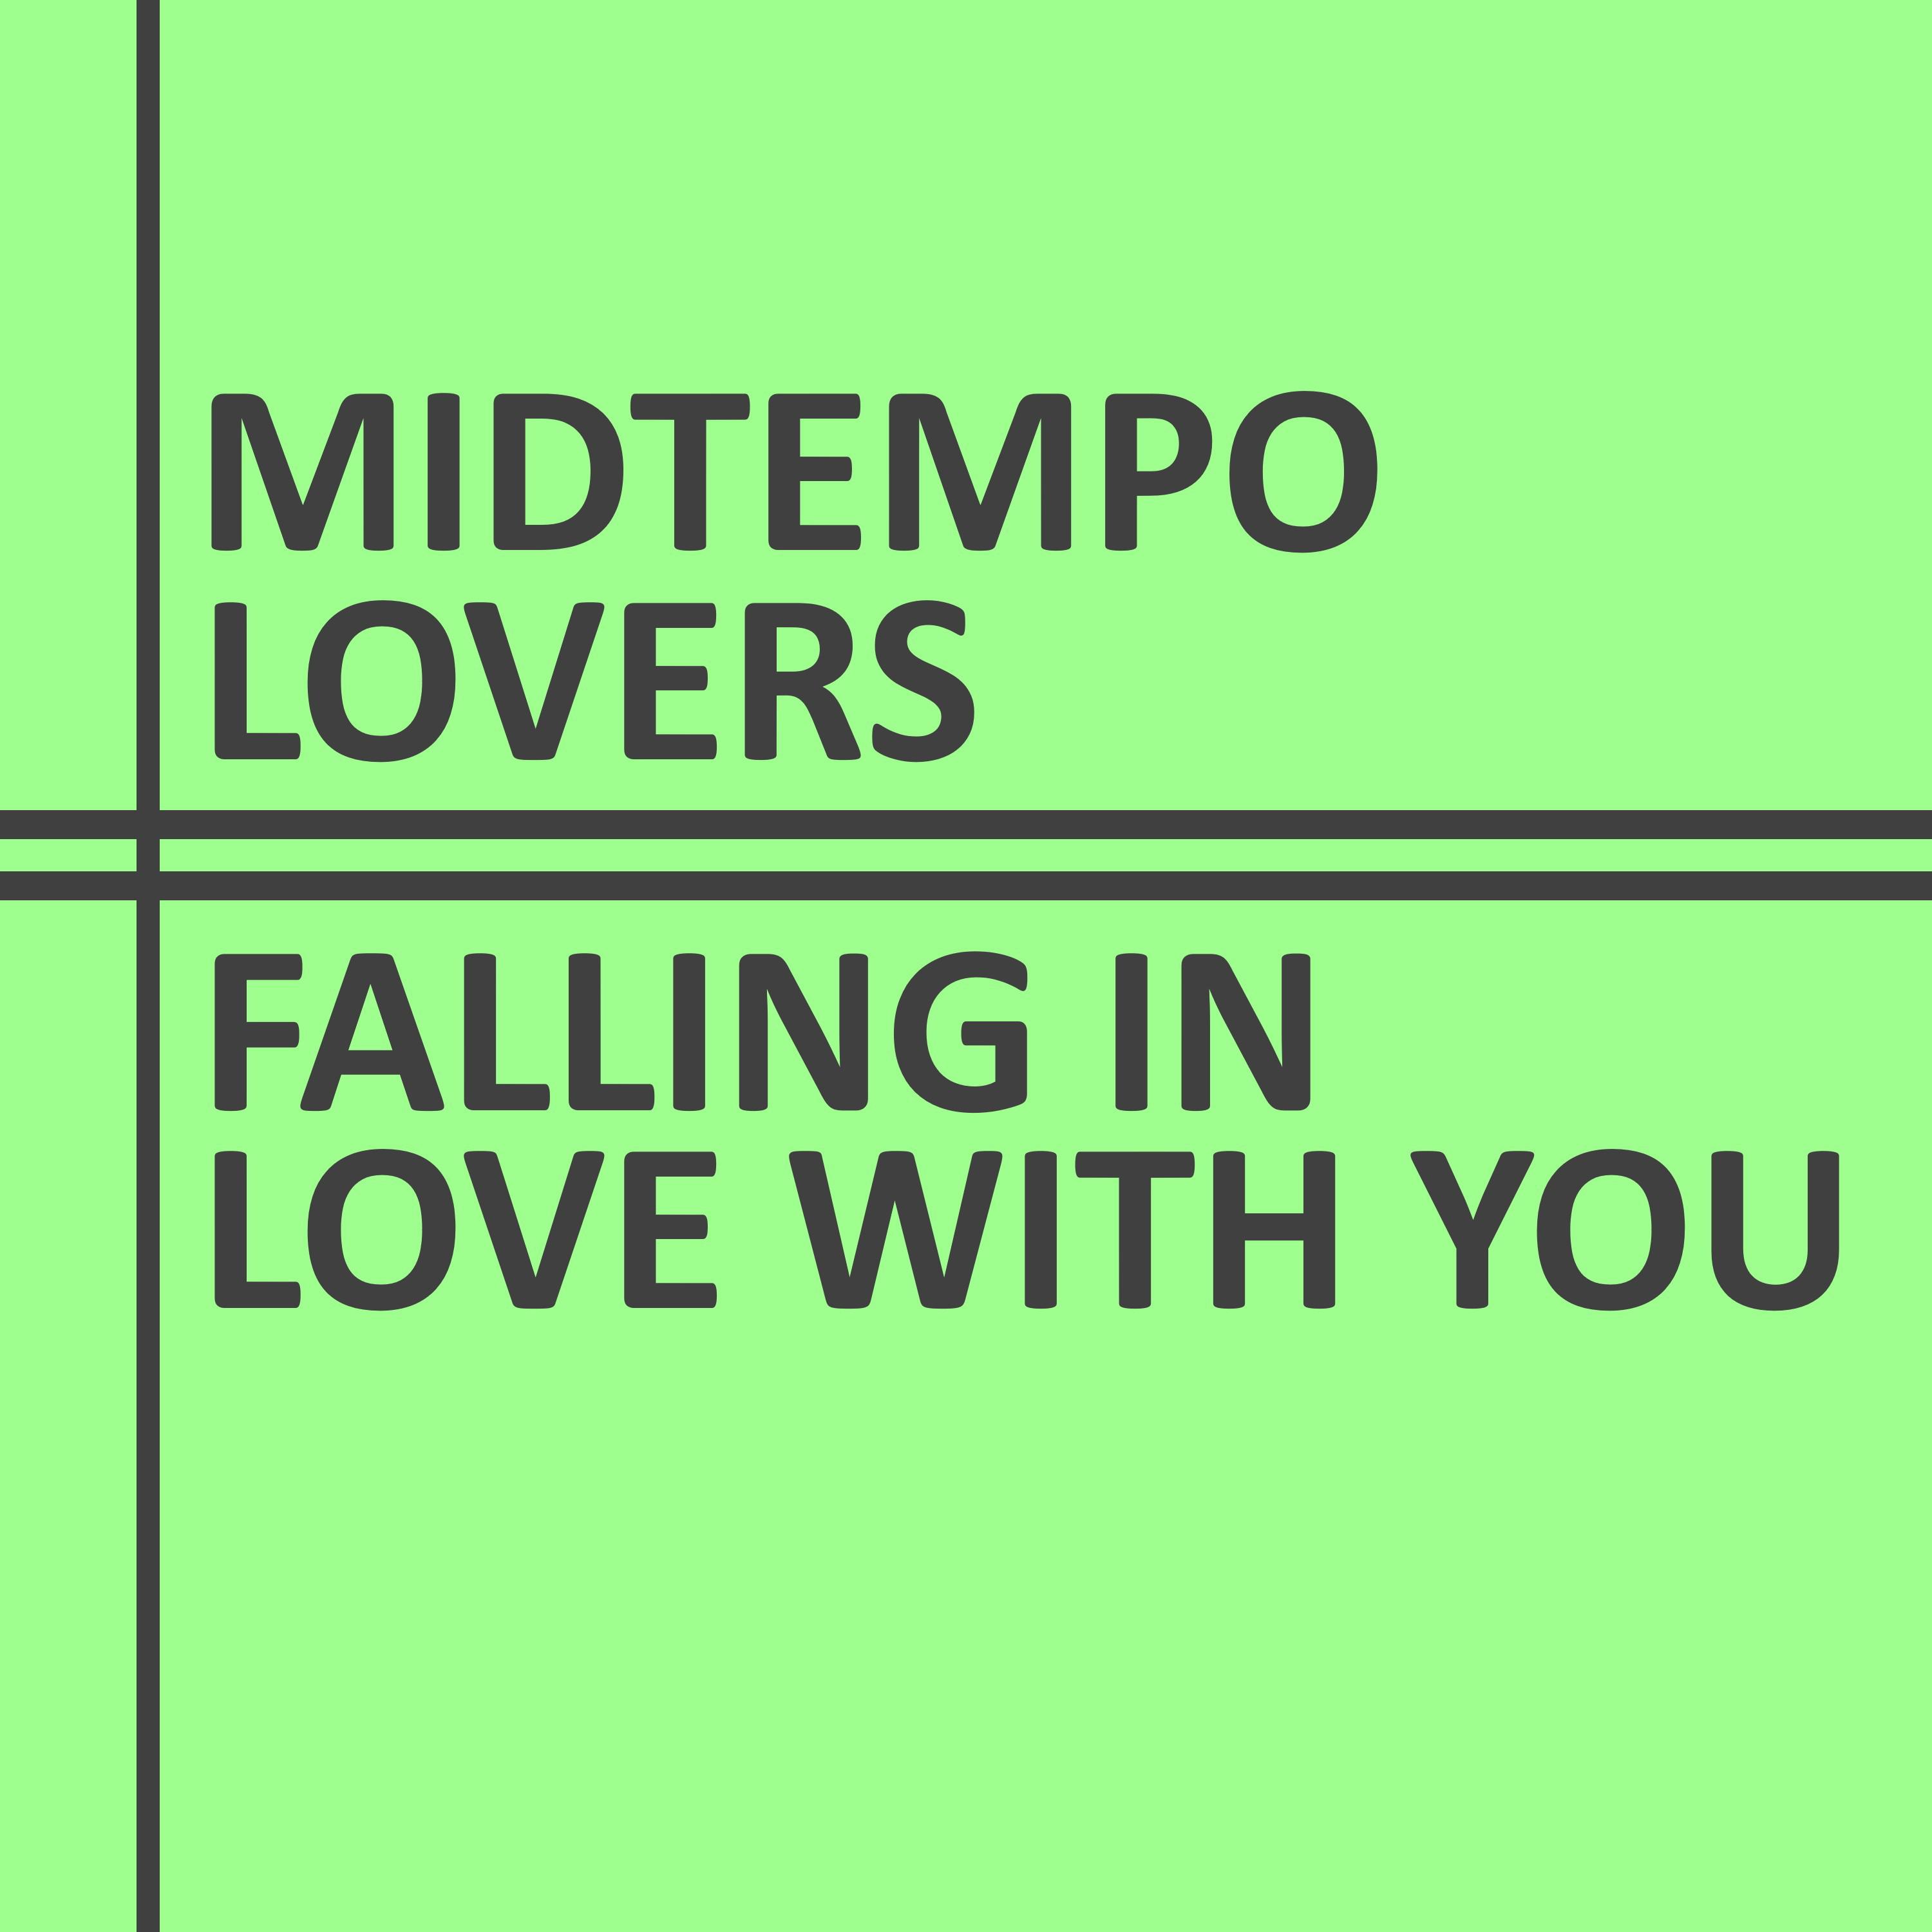 Midtempo Lovers - You Still Have Made a Choice